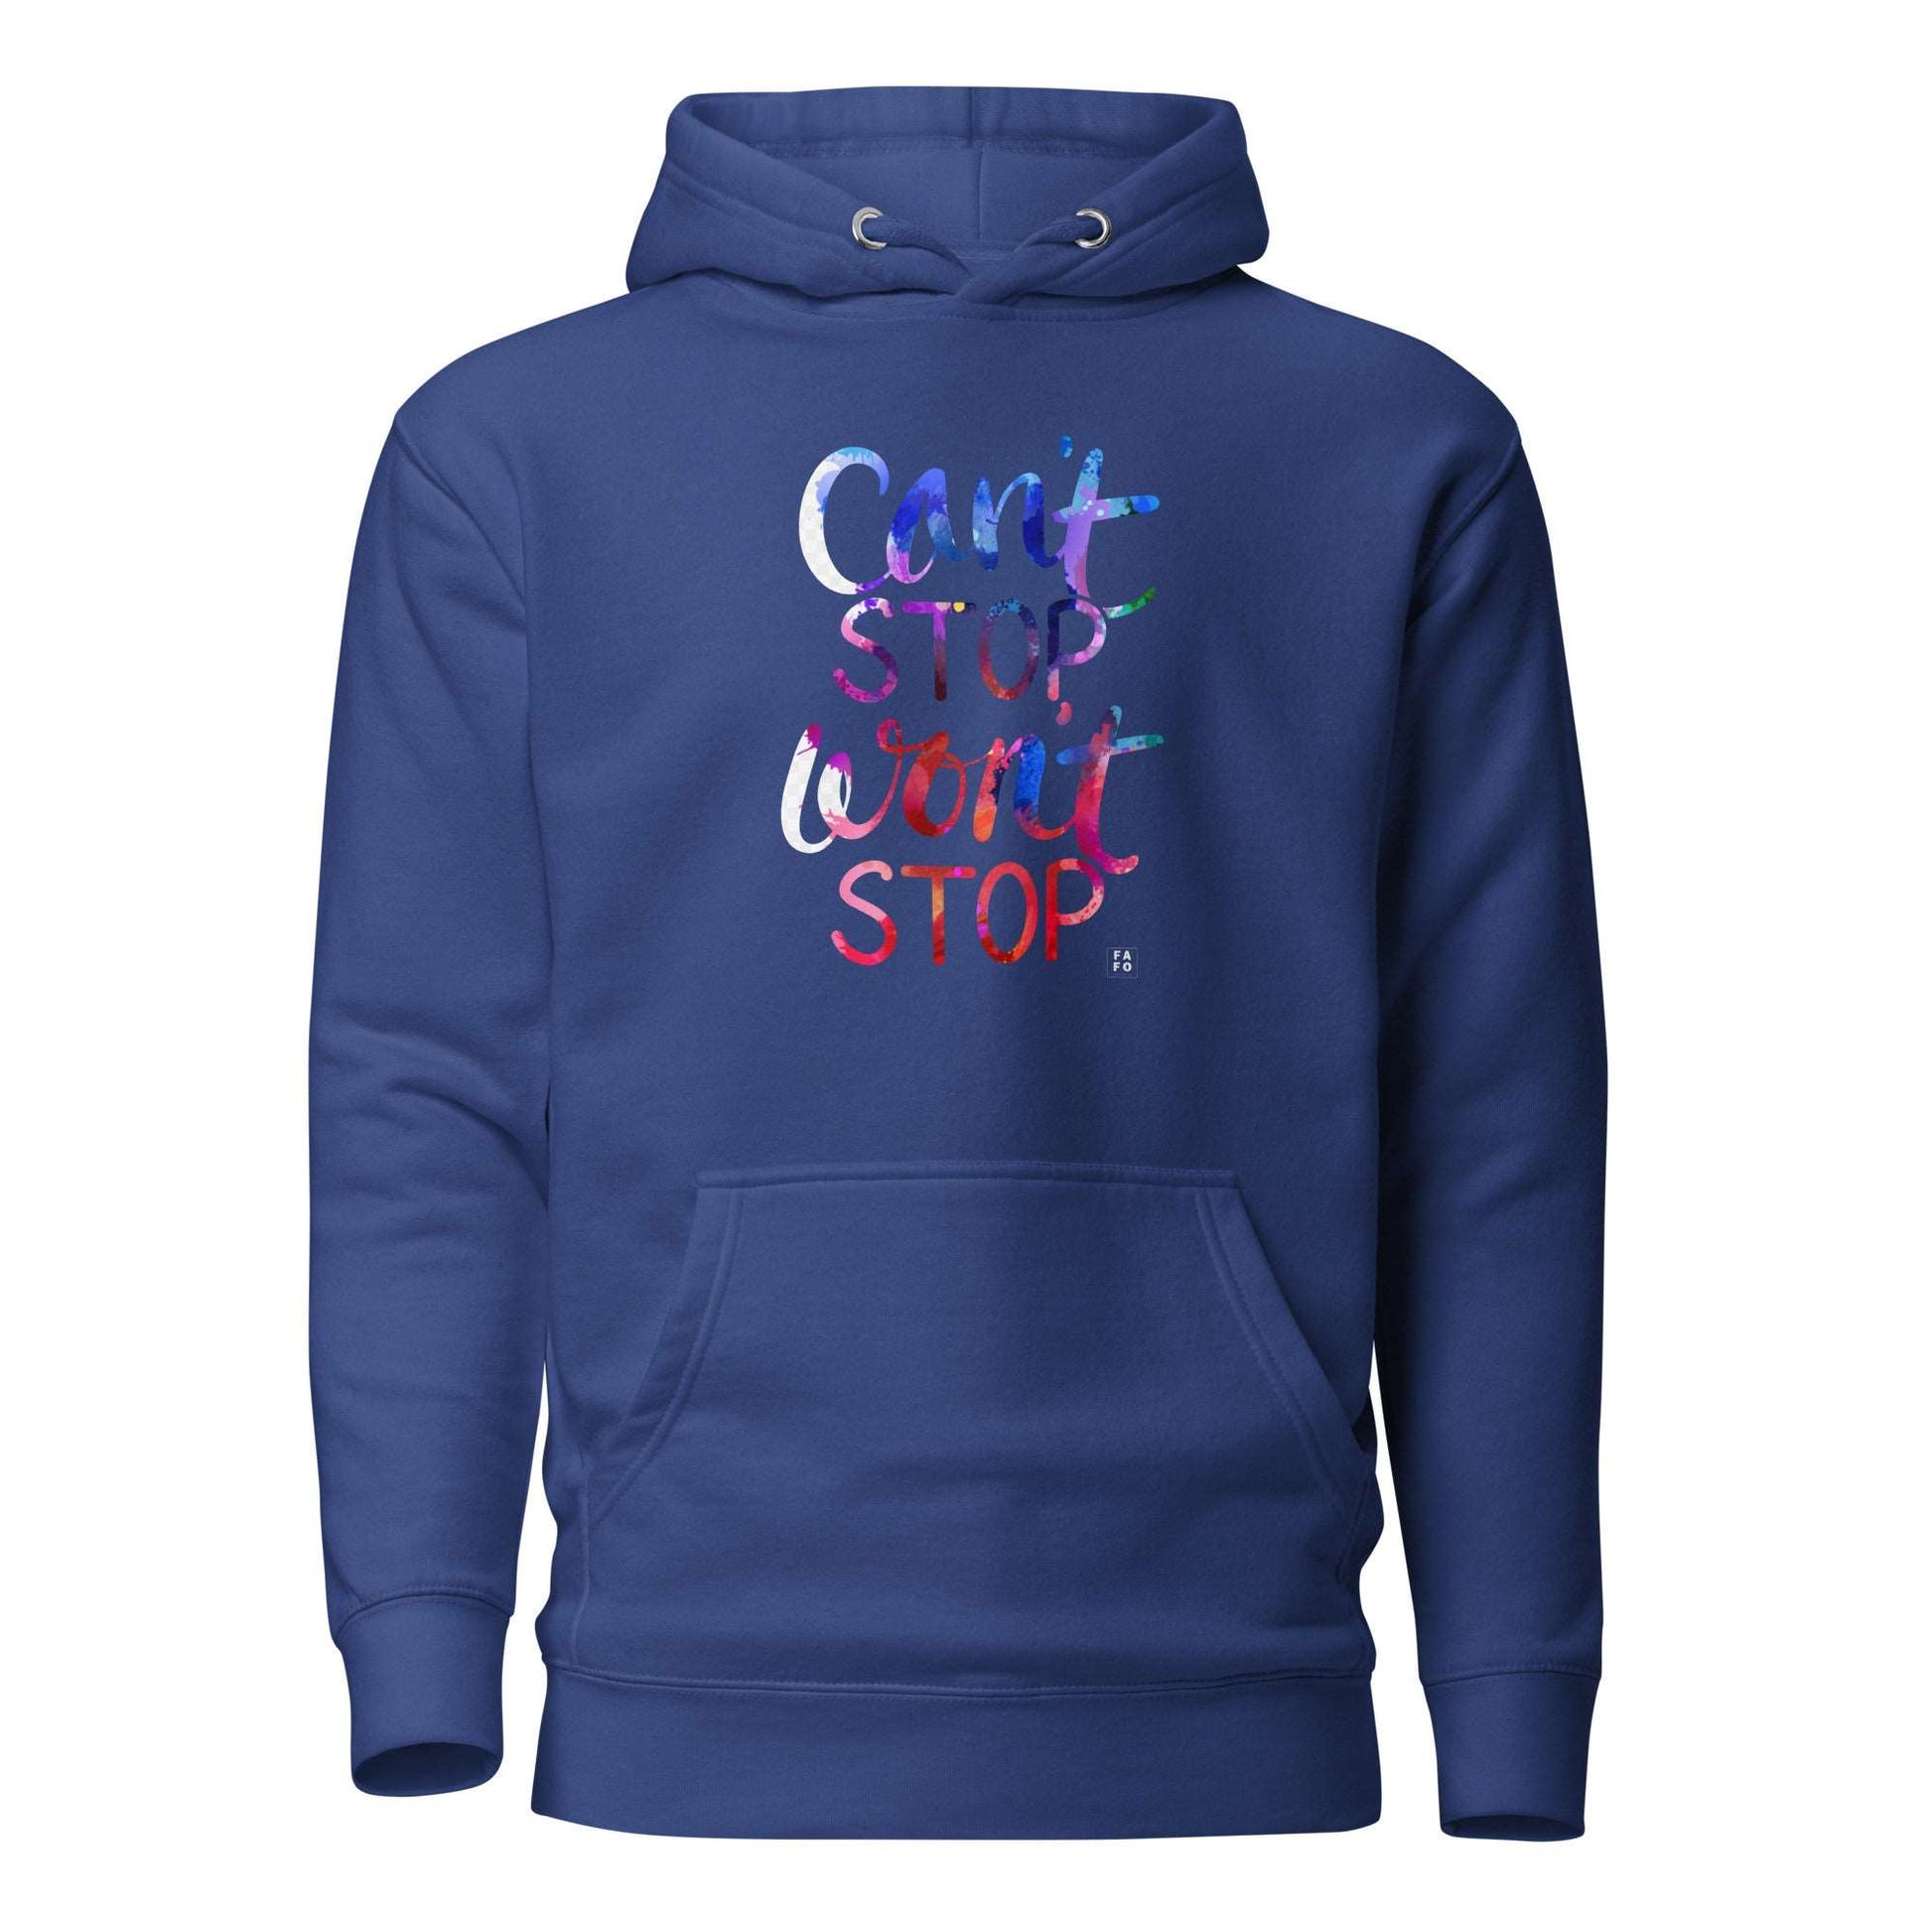 Women's Hoodie - Can't Stop Won't Stop